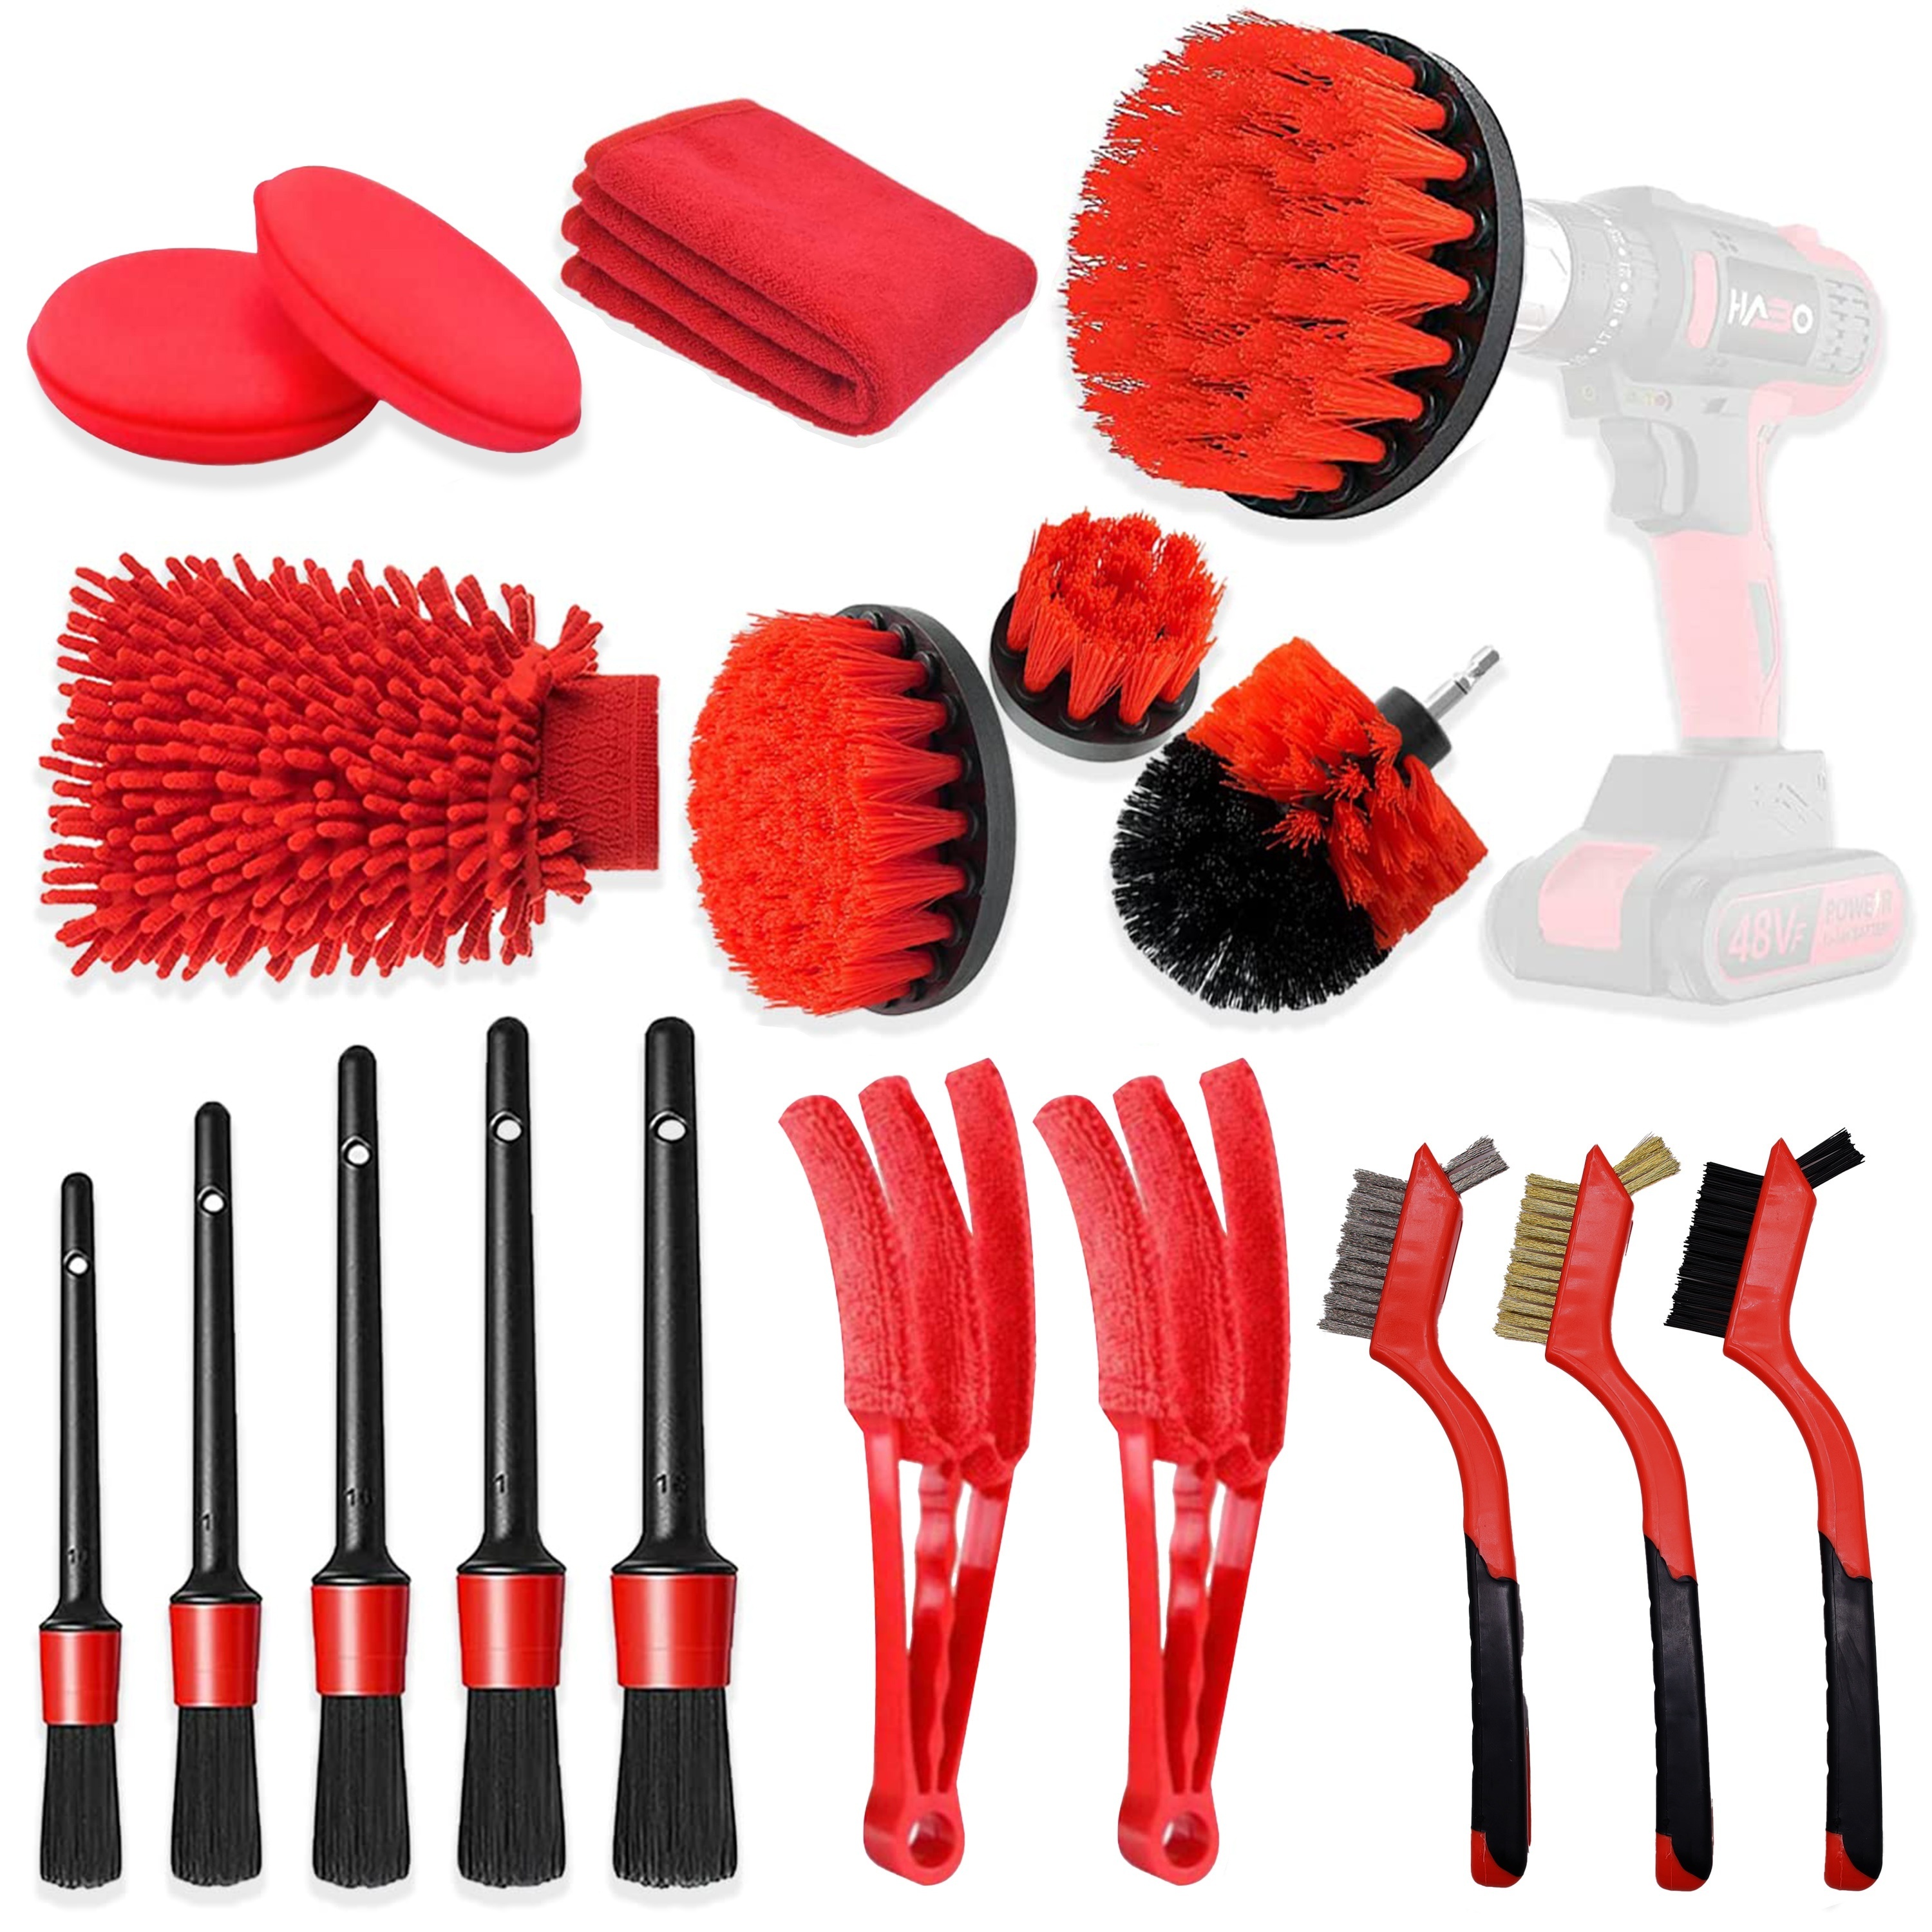 Car Wash Cleaning Tool Kit Car Detailing Set with Clay Bar